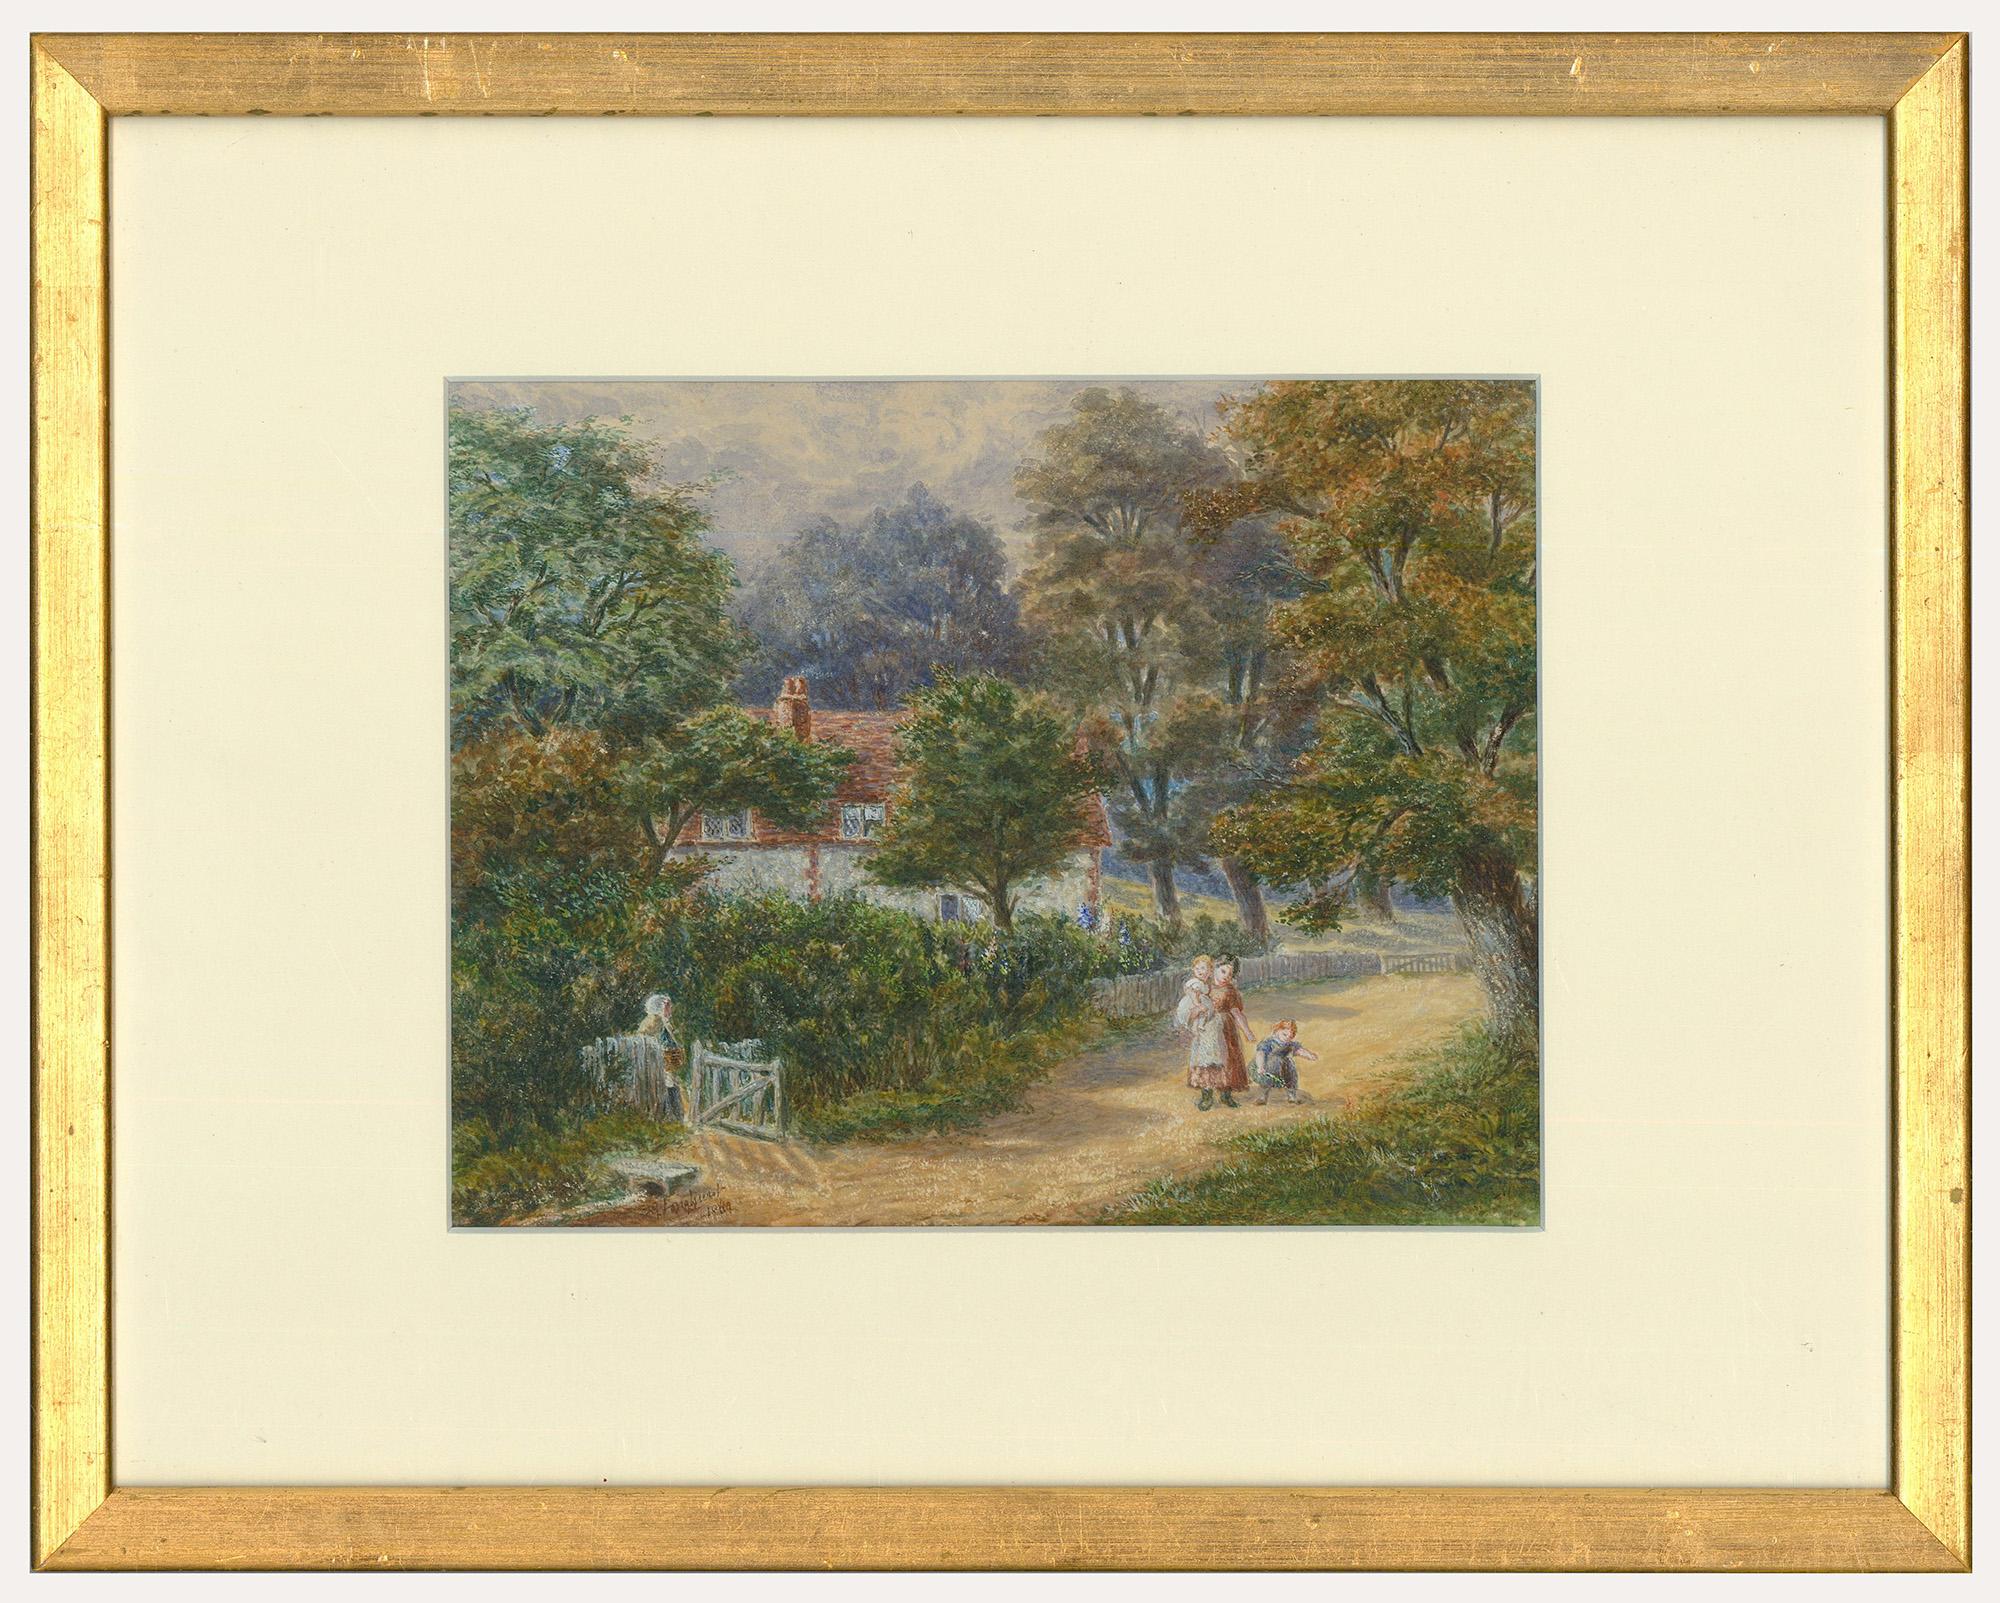 Unknown Landscape Art - F. G. Longhurst - Framed Mid 19th Century Watercolour, Walking with the Children